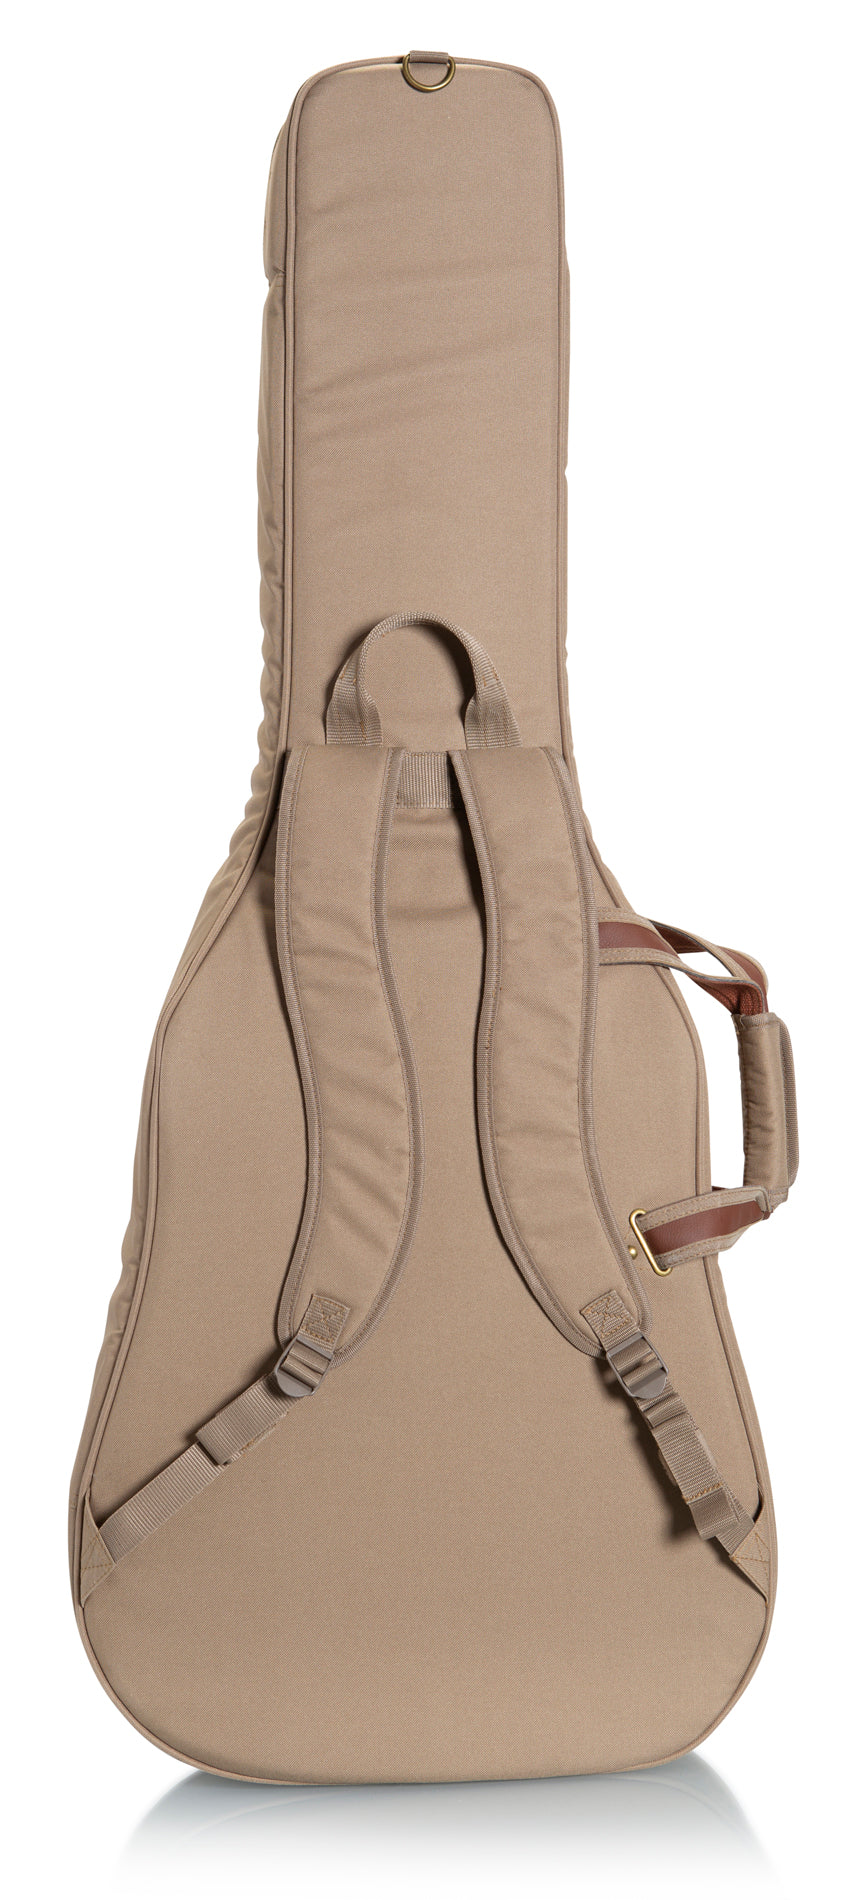 Levy's Deluxe Gig Bag for Dread Guitars - Tan